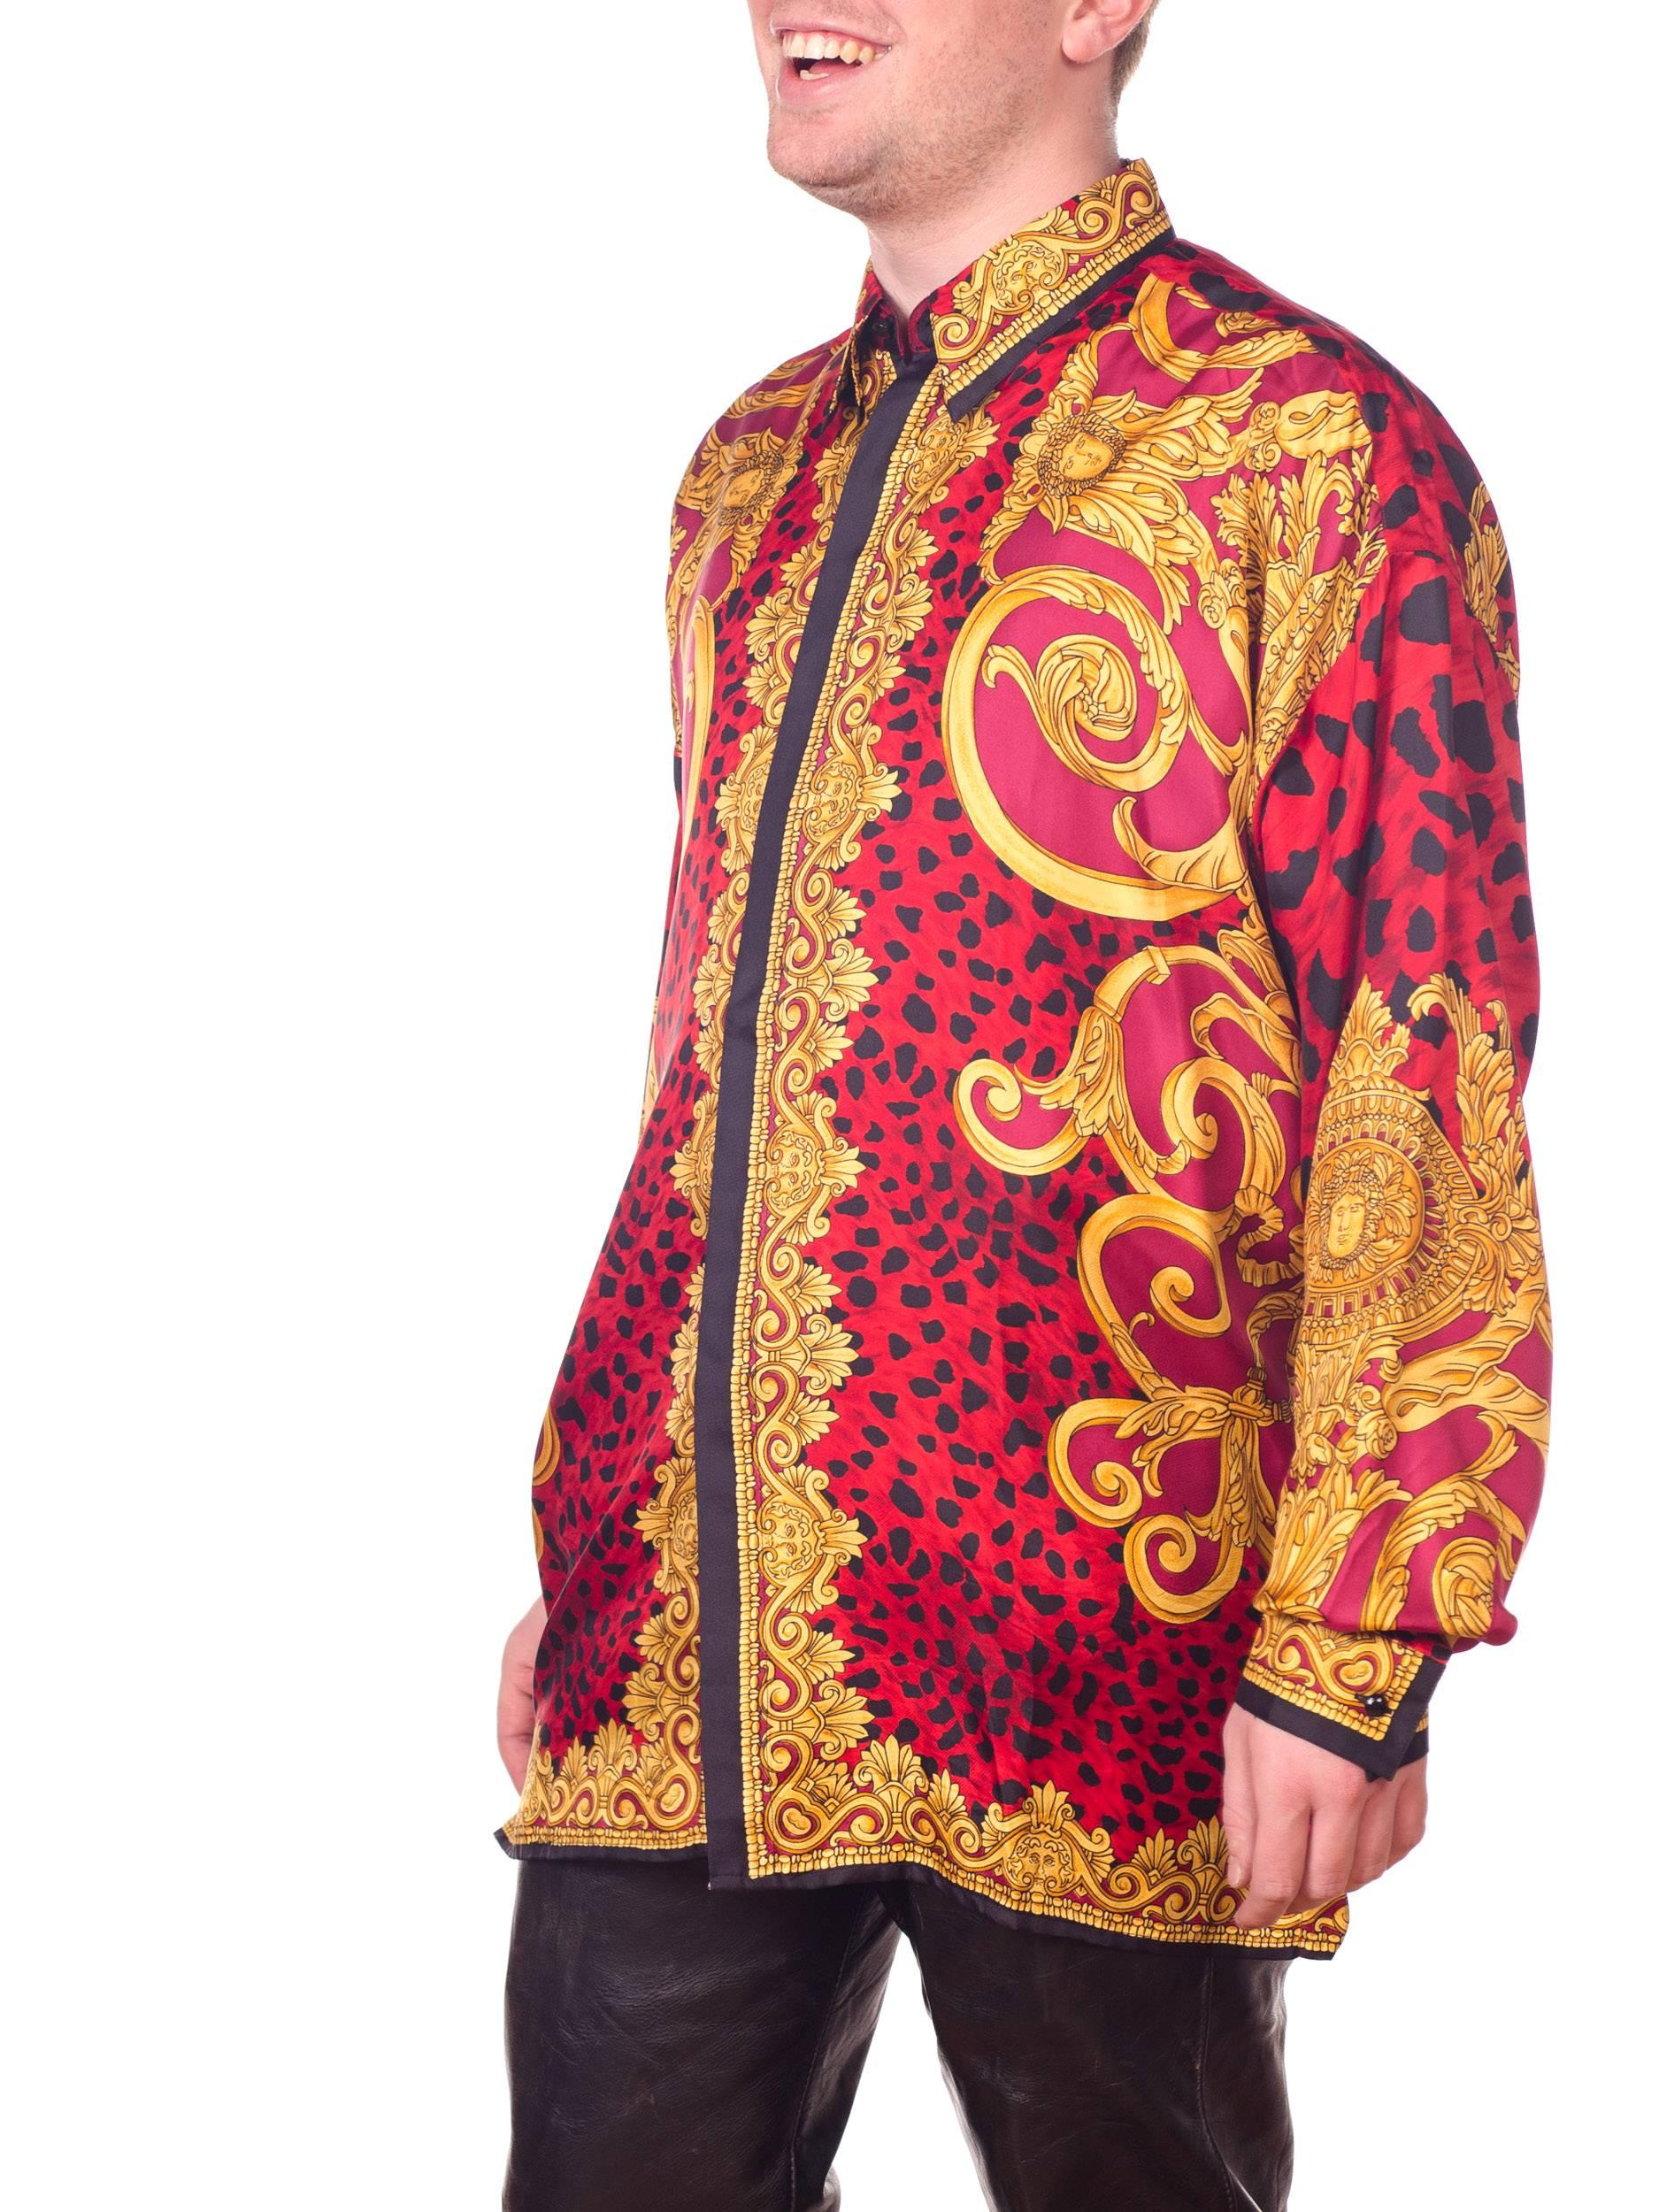 Gianni Versace early 1990s Mens Red Baroque Leopard Print Silk Shirt 1